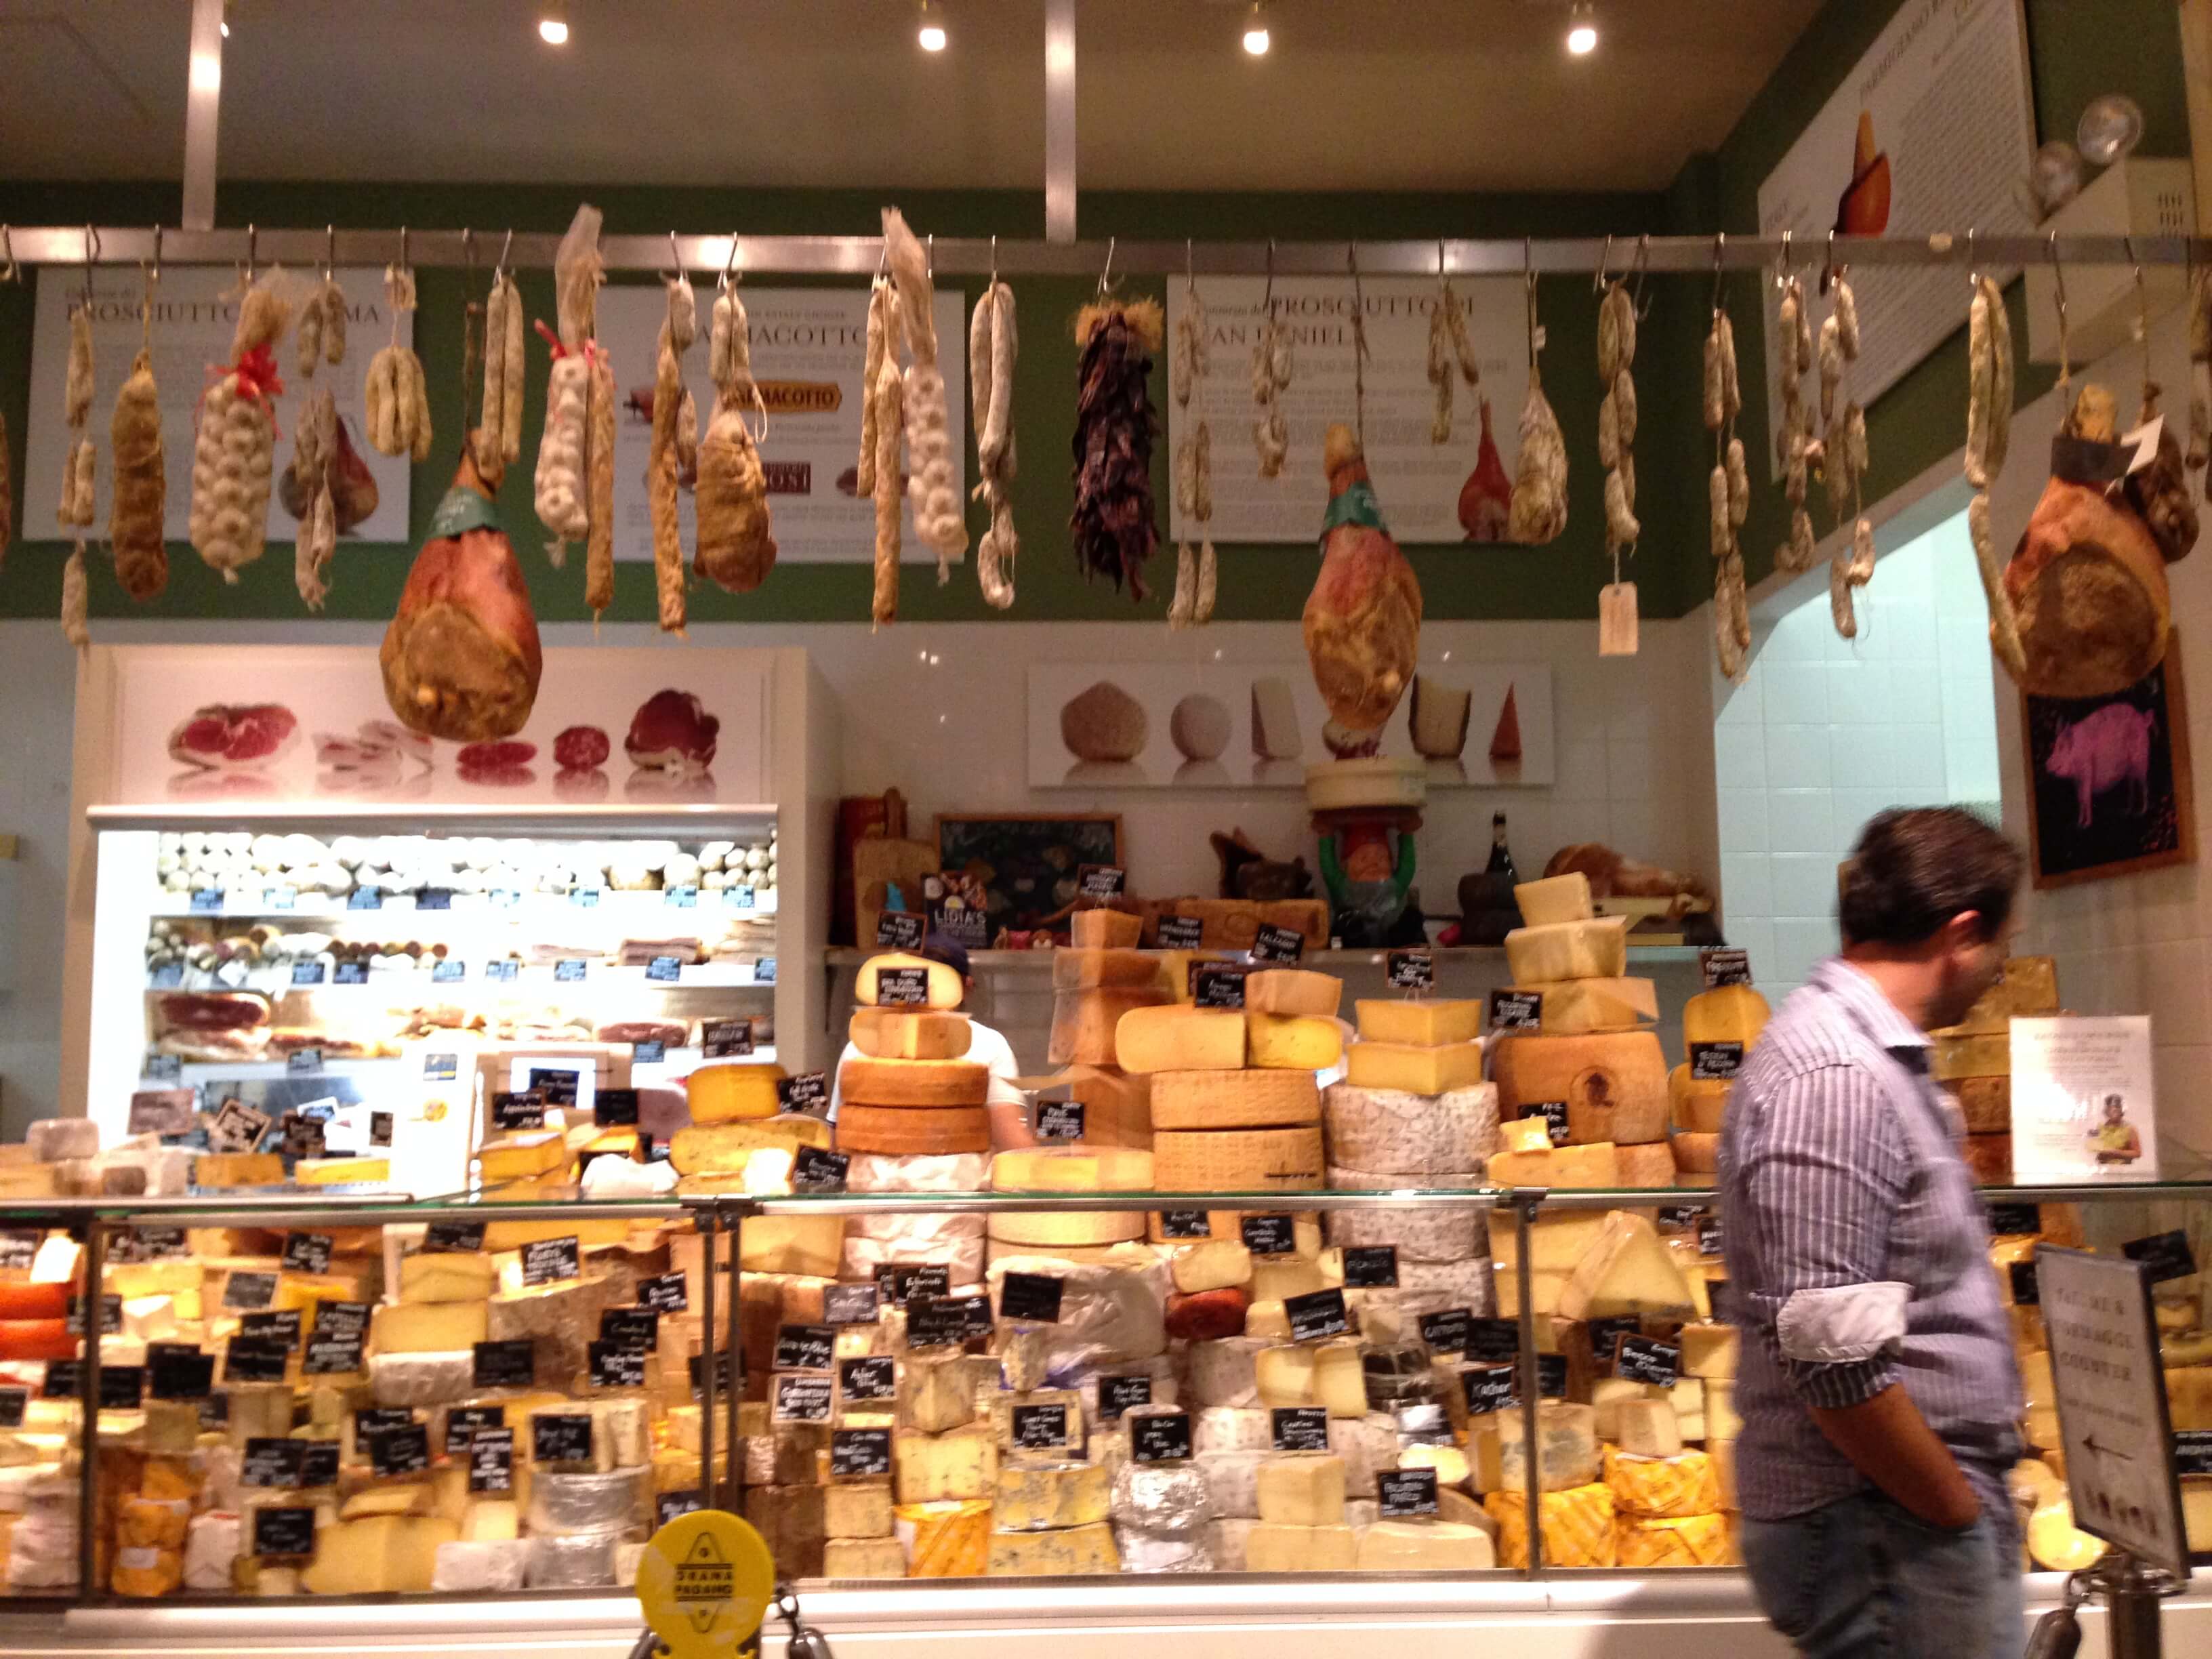 I took my time browsing Eataly in NYC!